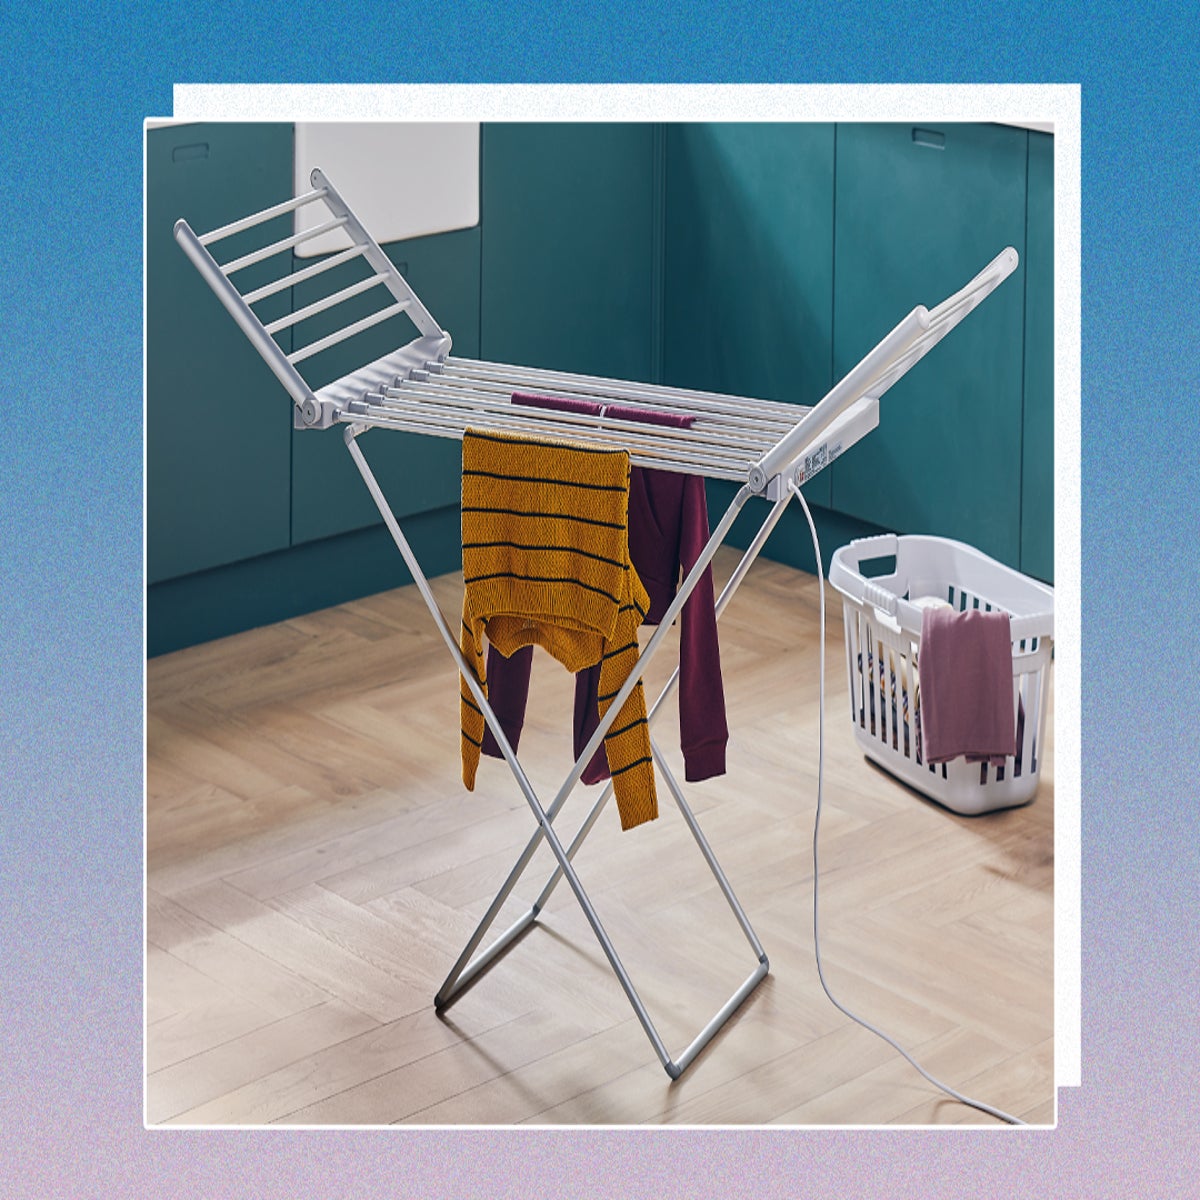 Foldable Clothes Dryer Simply Operate Electric Clothes Drying